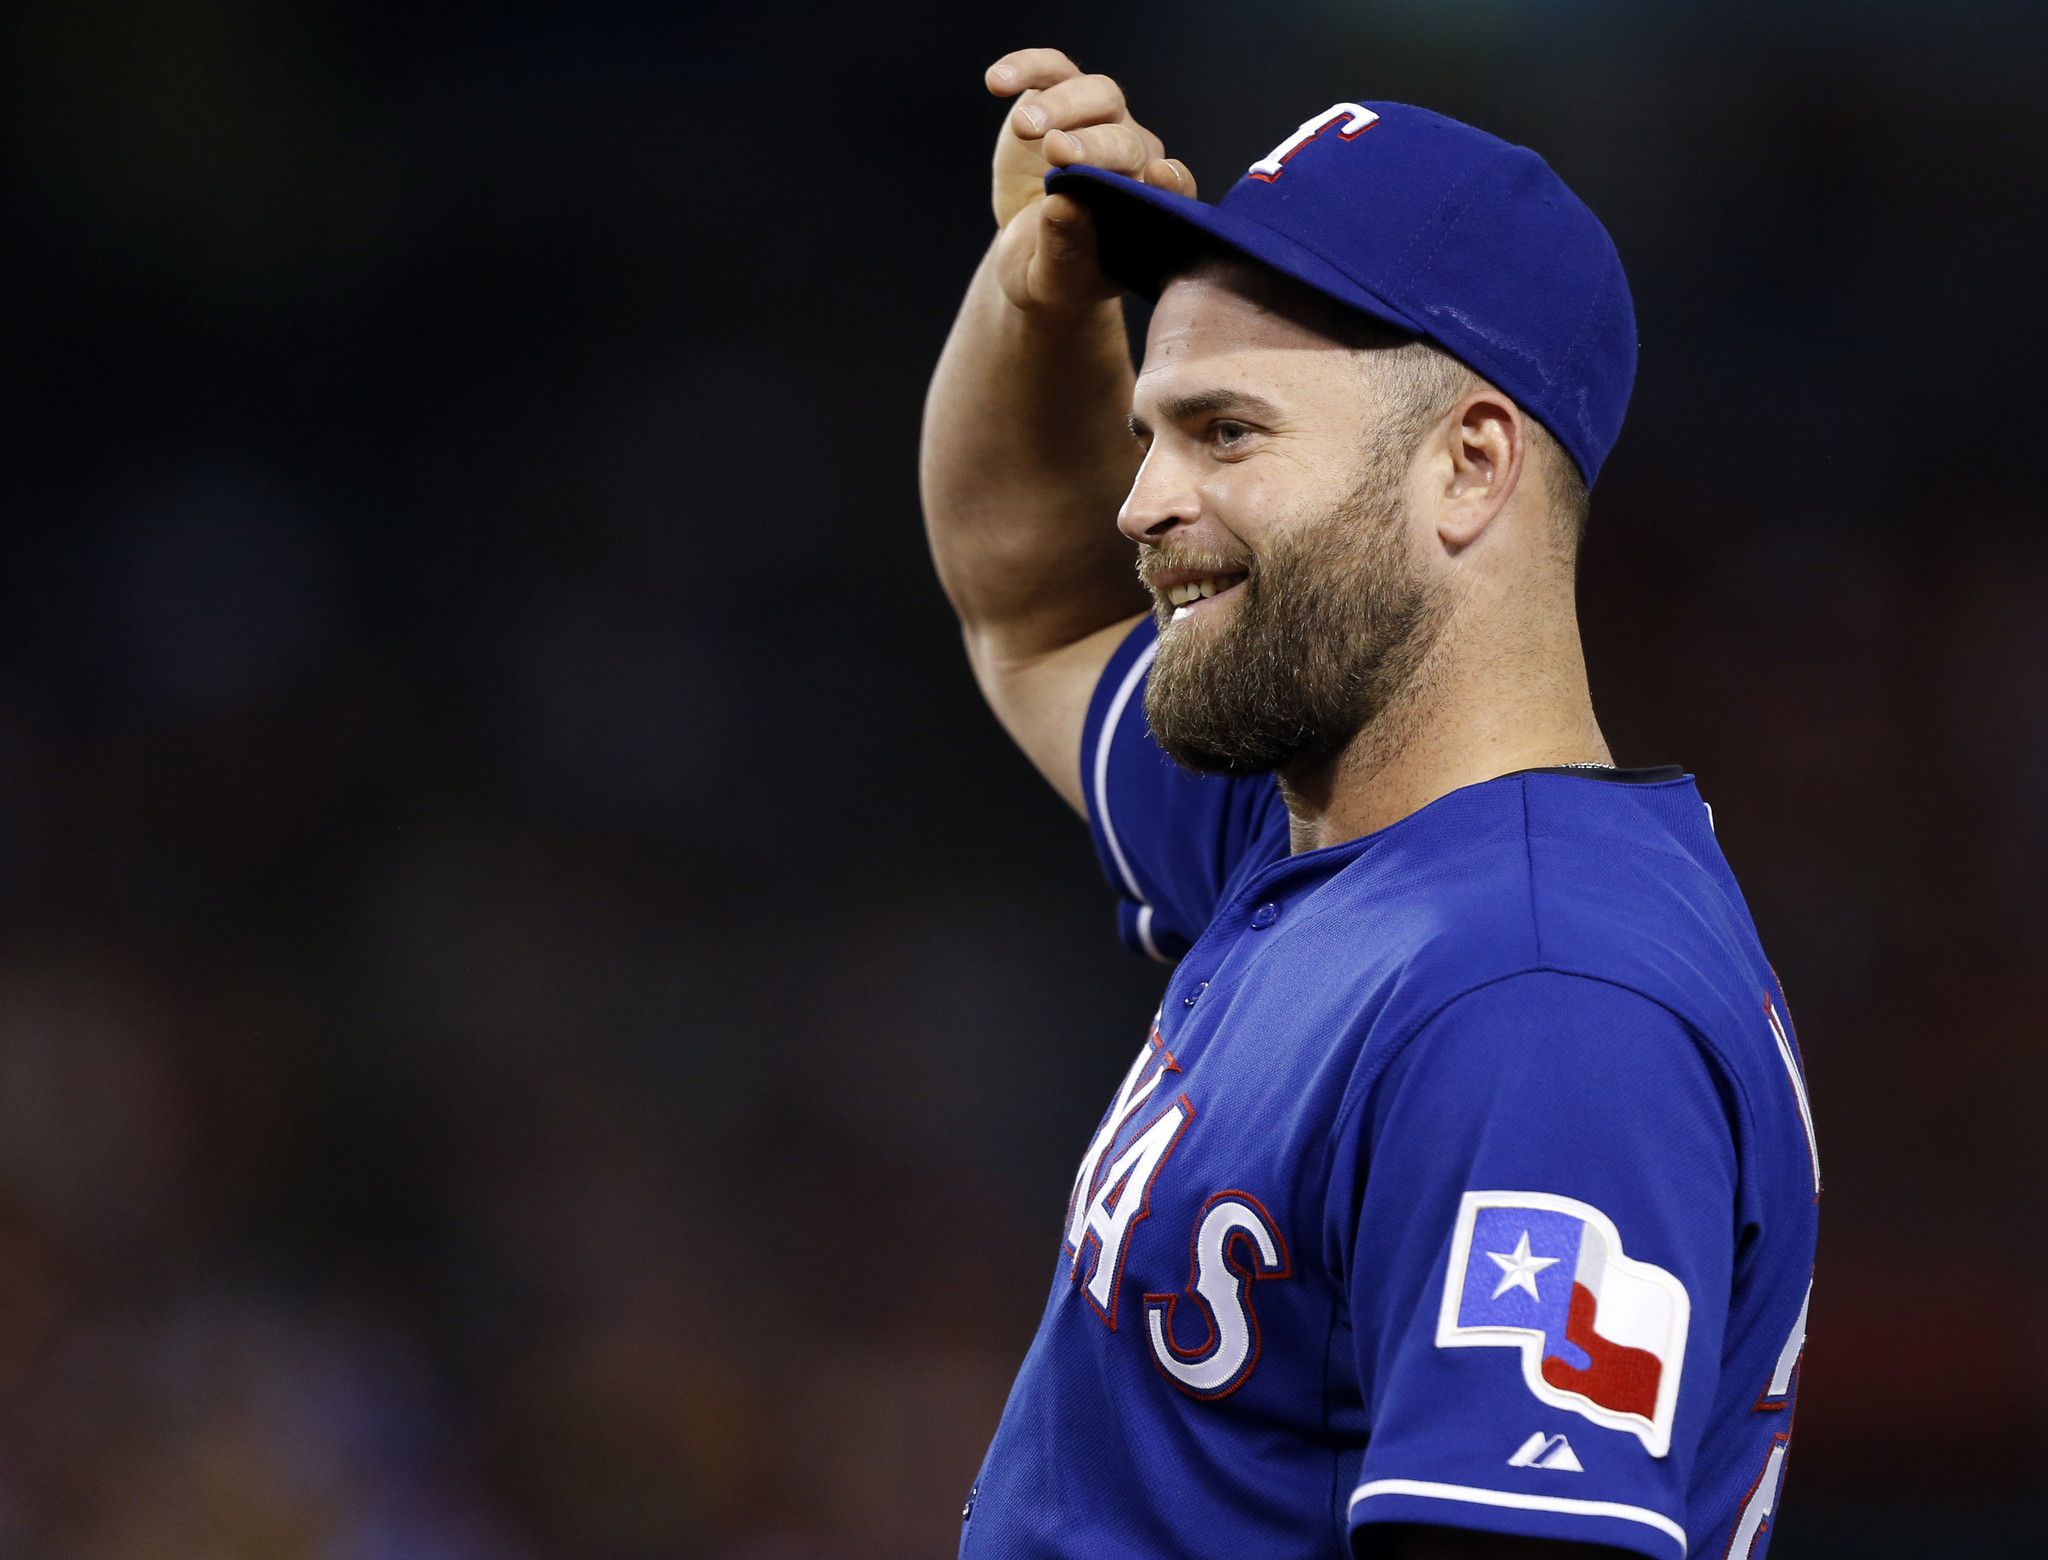 Cubs coach Mike Napoli back with team after recovering from COVID